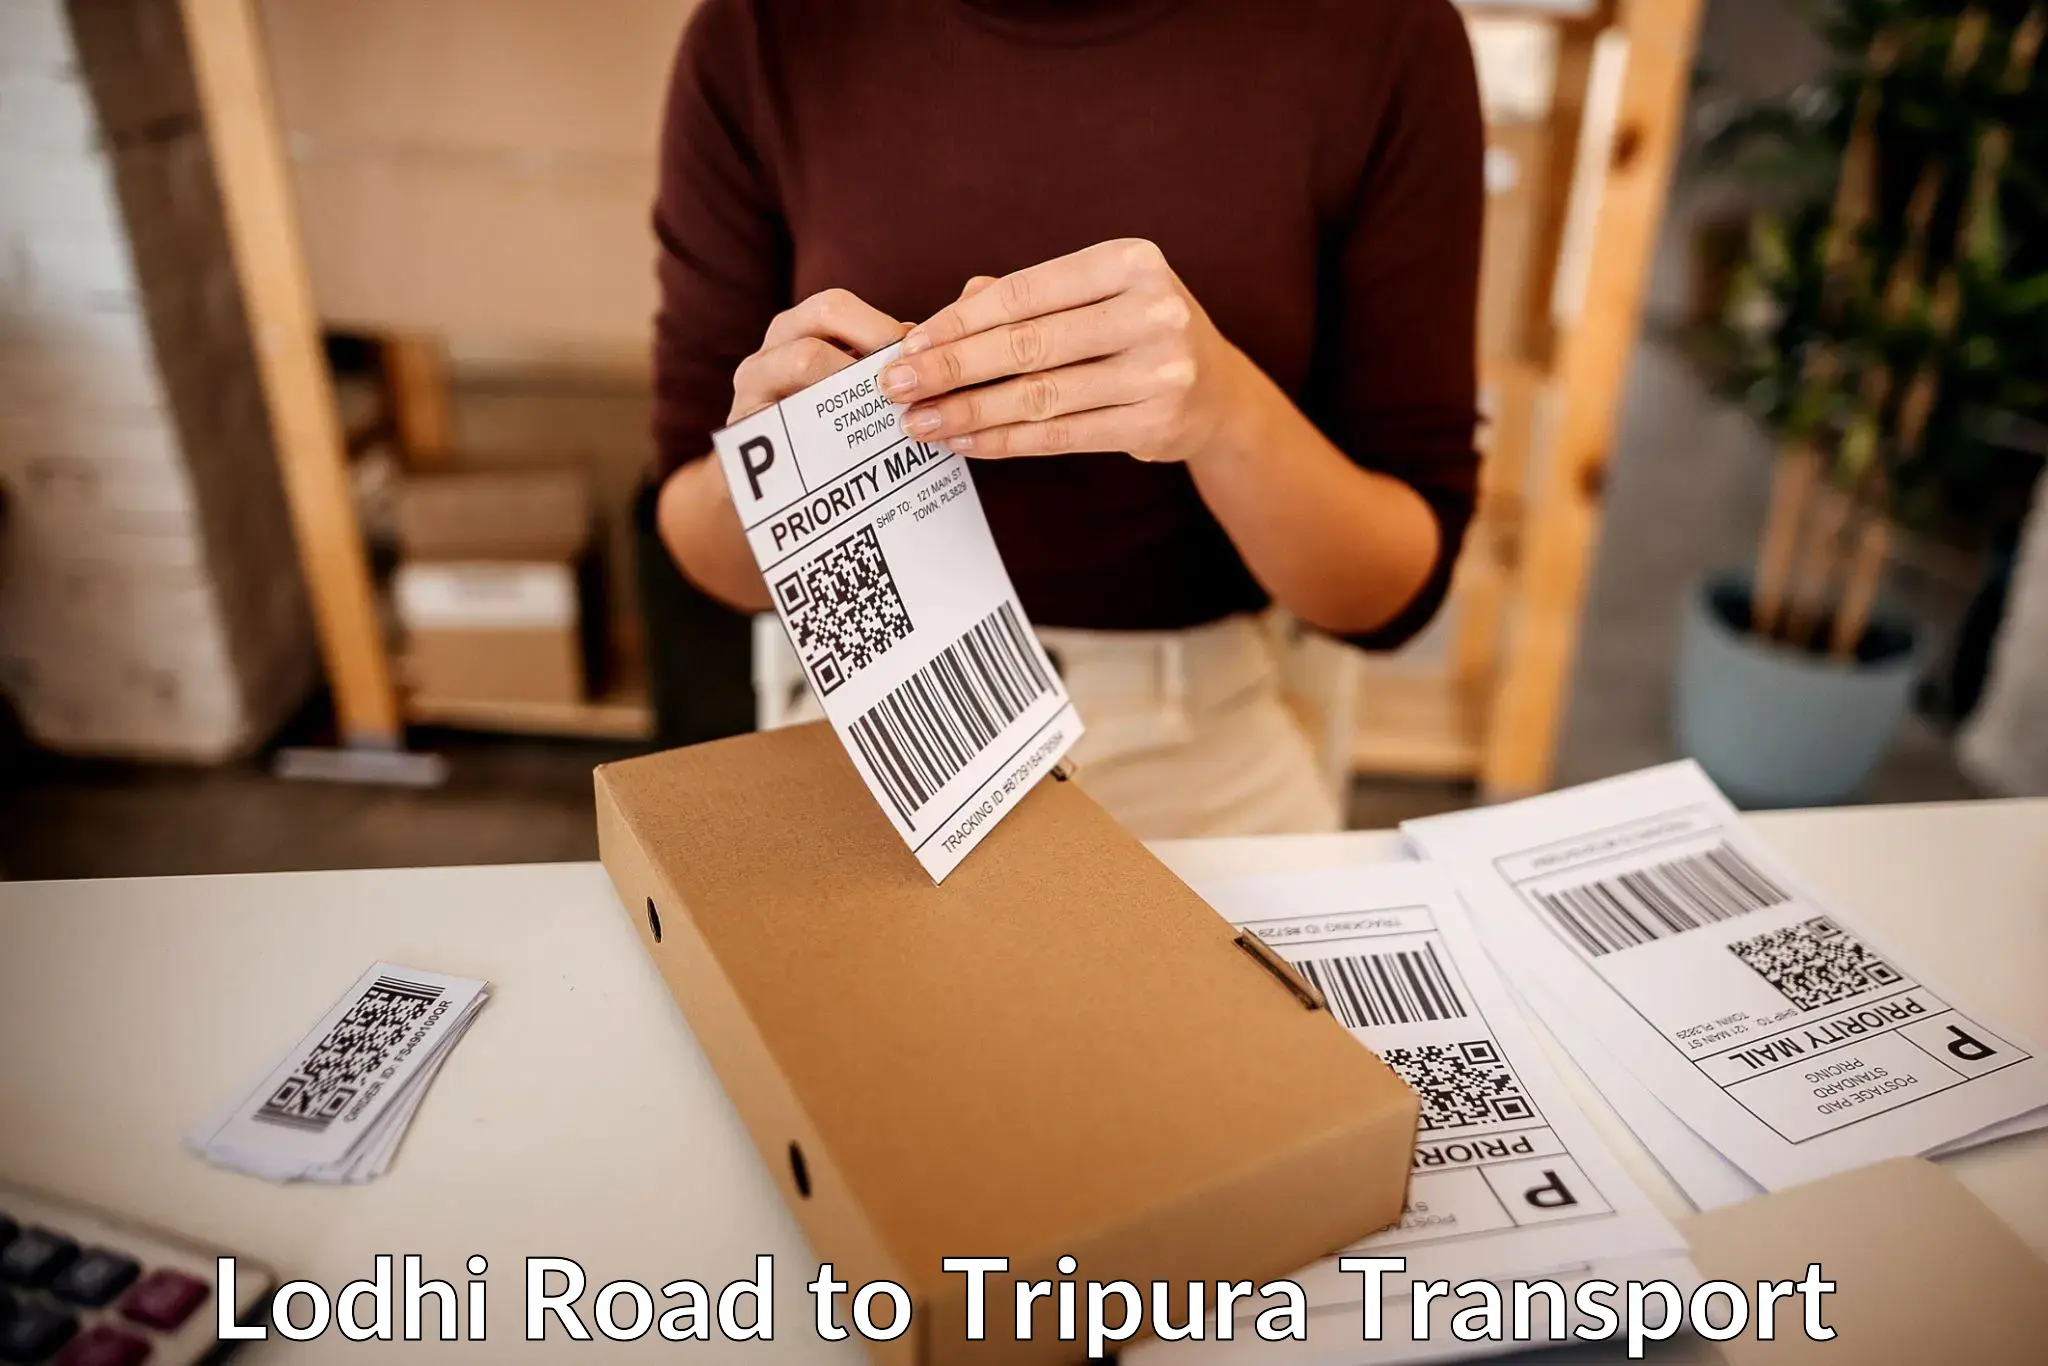 Daily parcel service transport Lodhi Road to Tripura